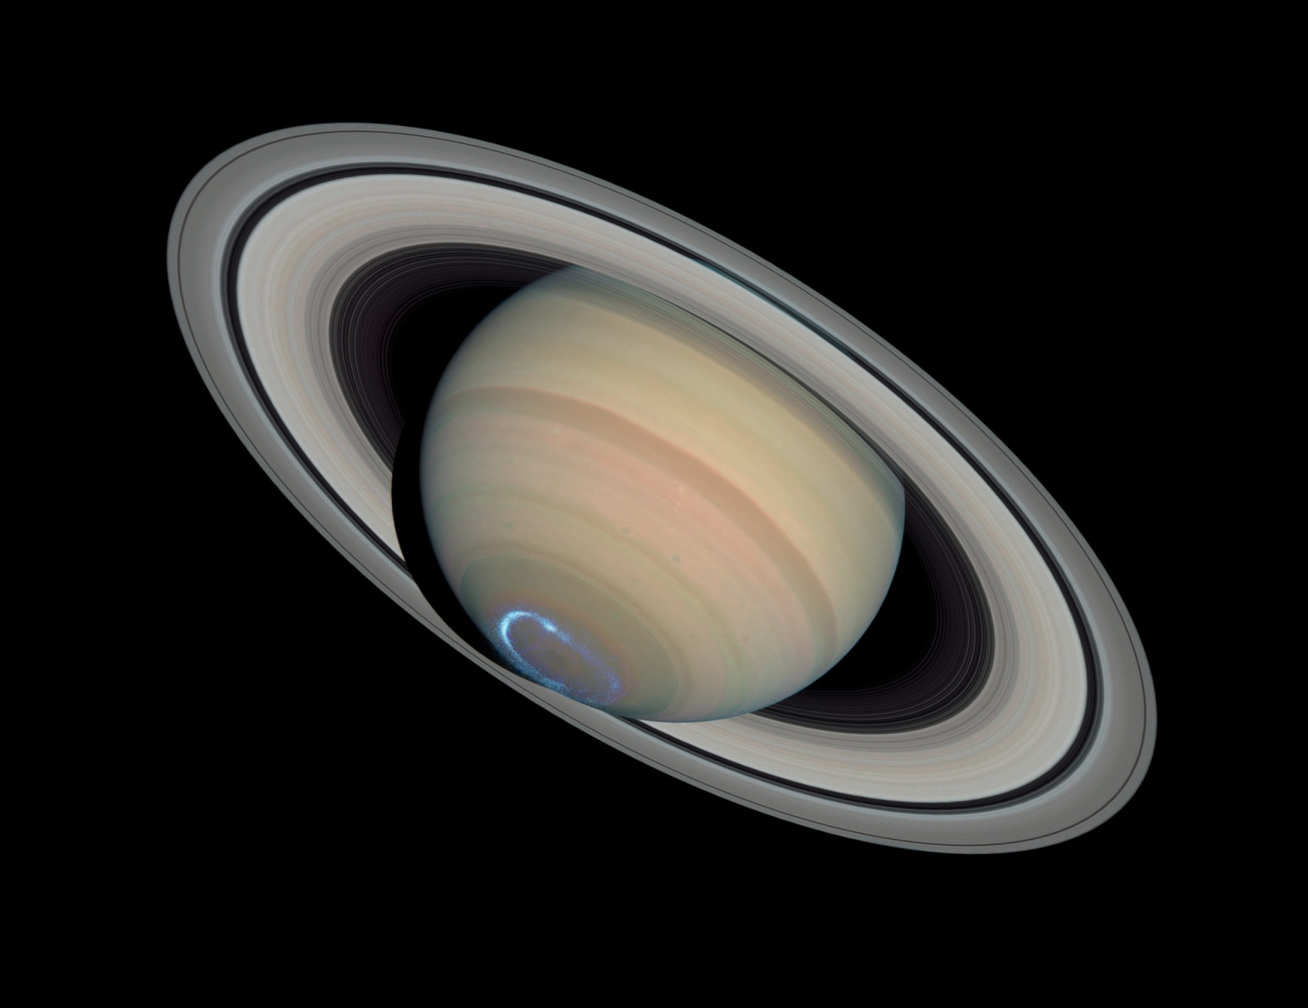 Saturn with a blue-white ring around the south pole